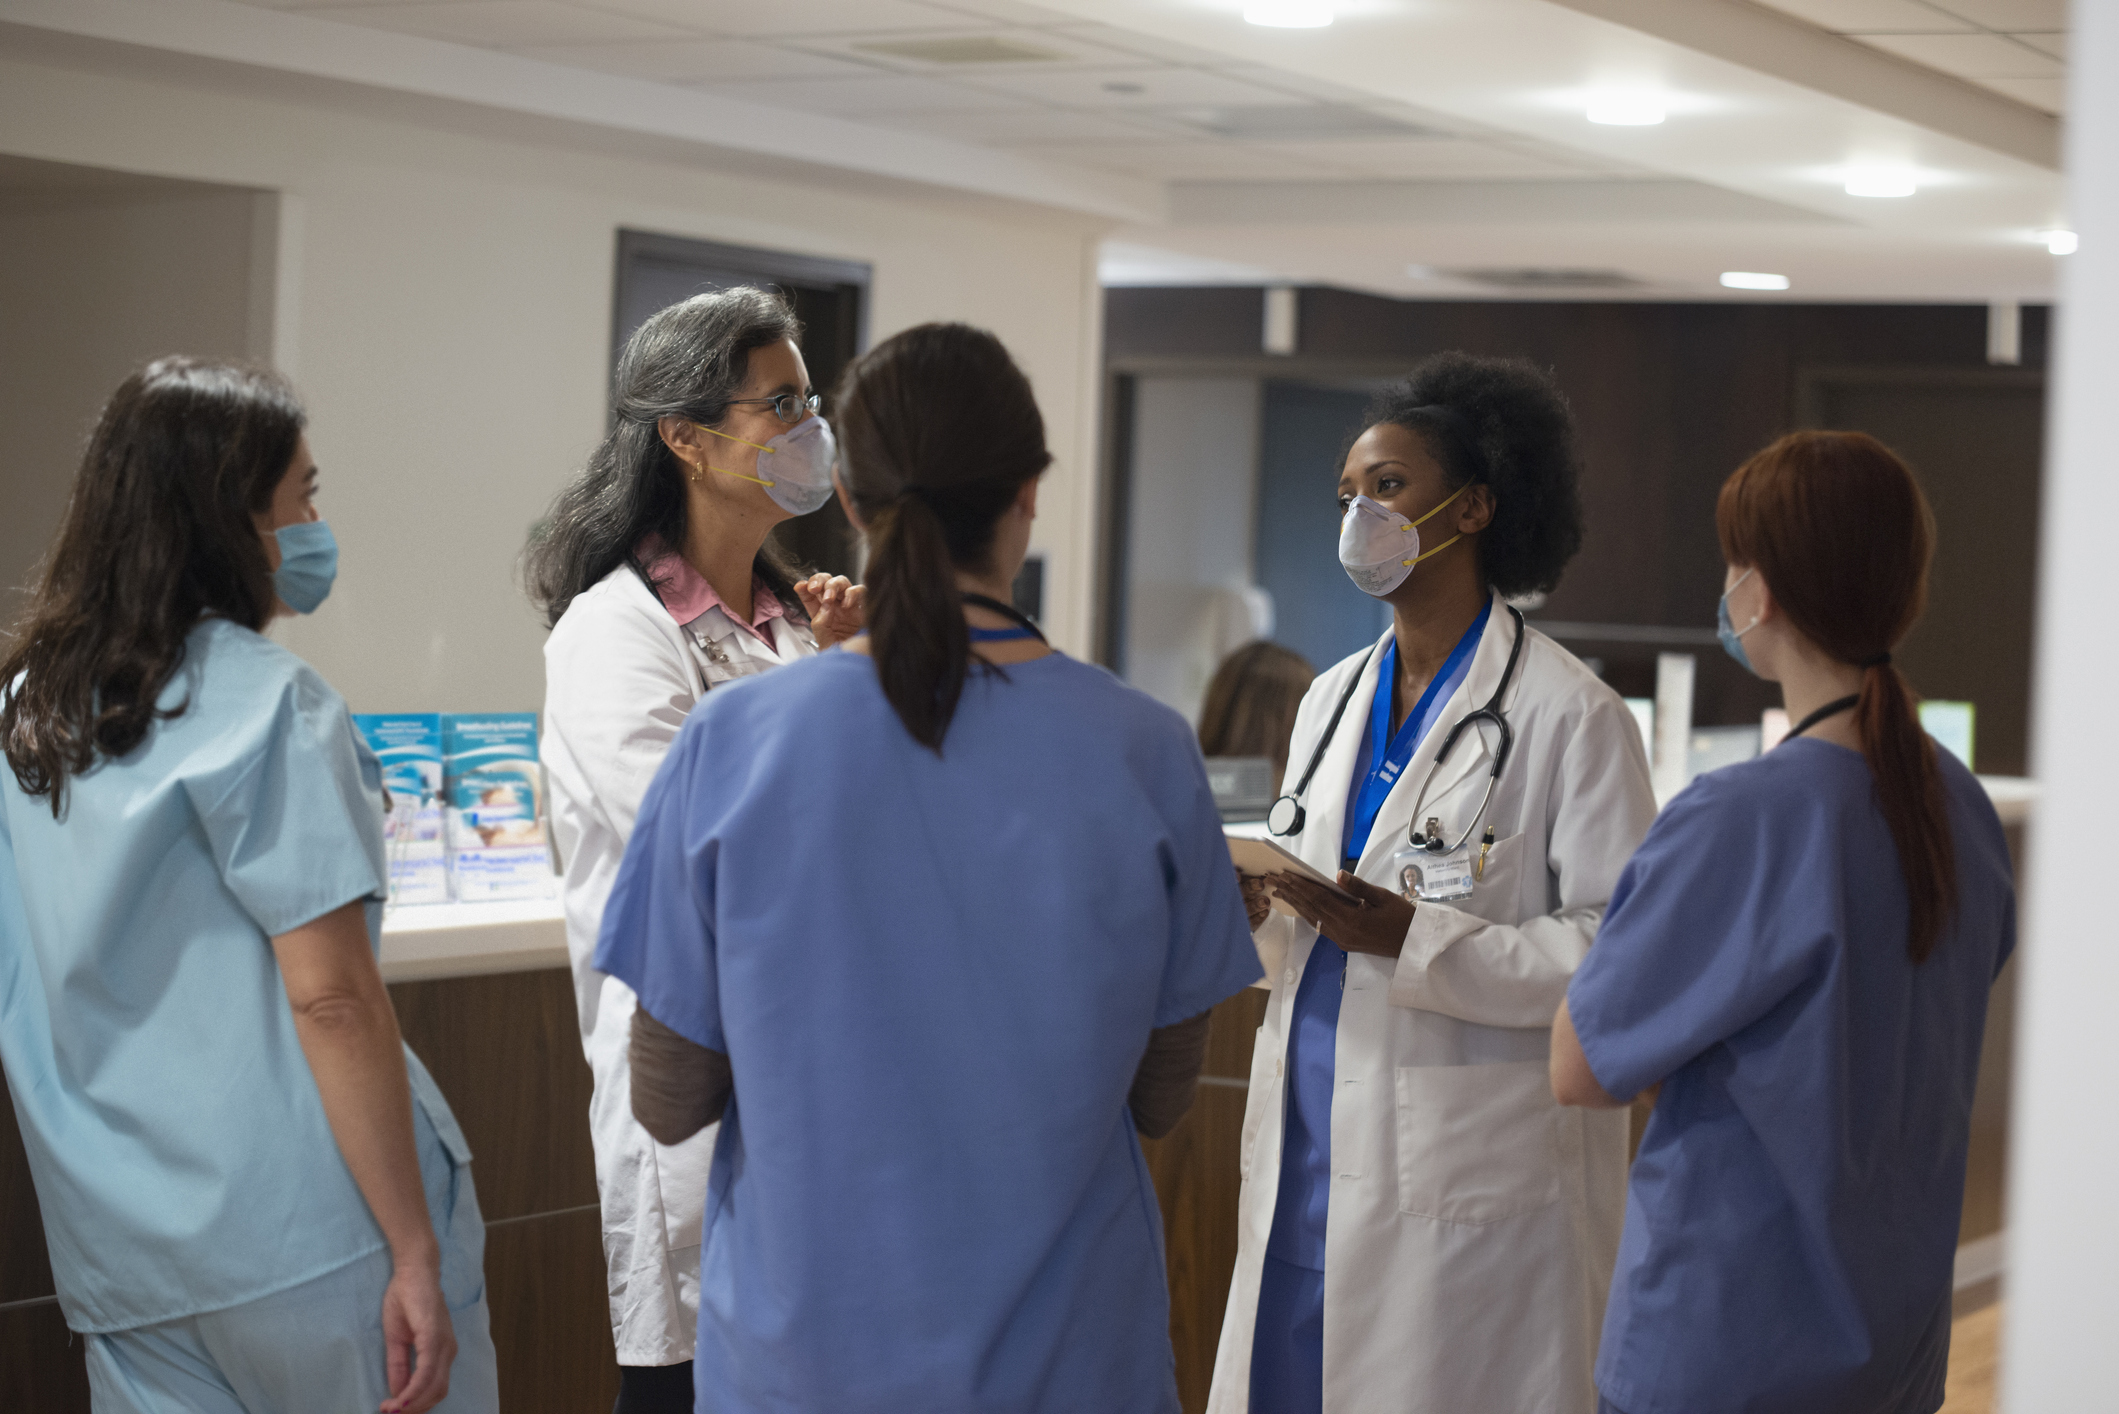 A group of five female doctors are talking in a hospital lobby near a desk